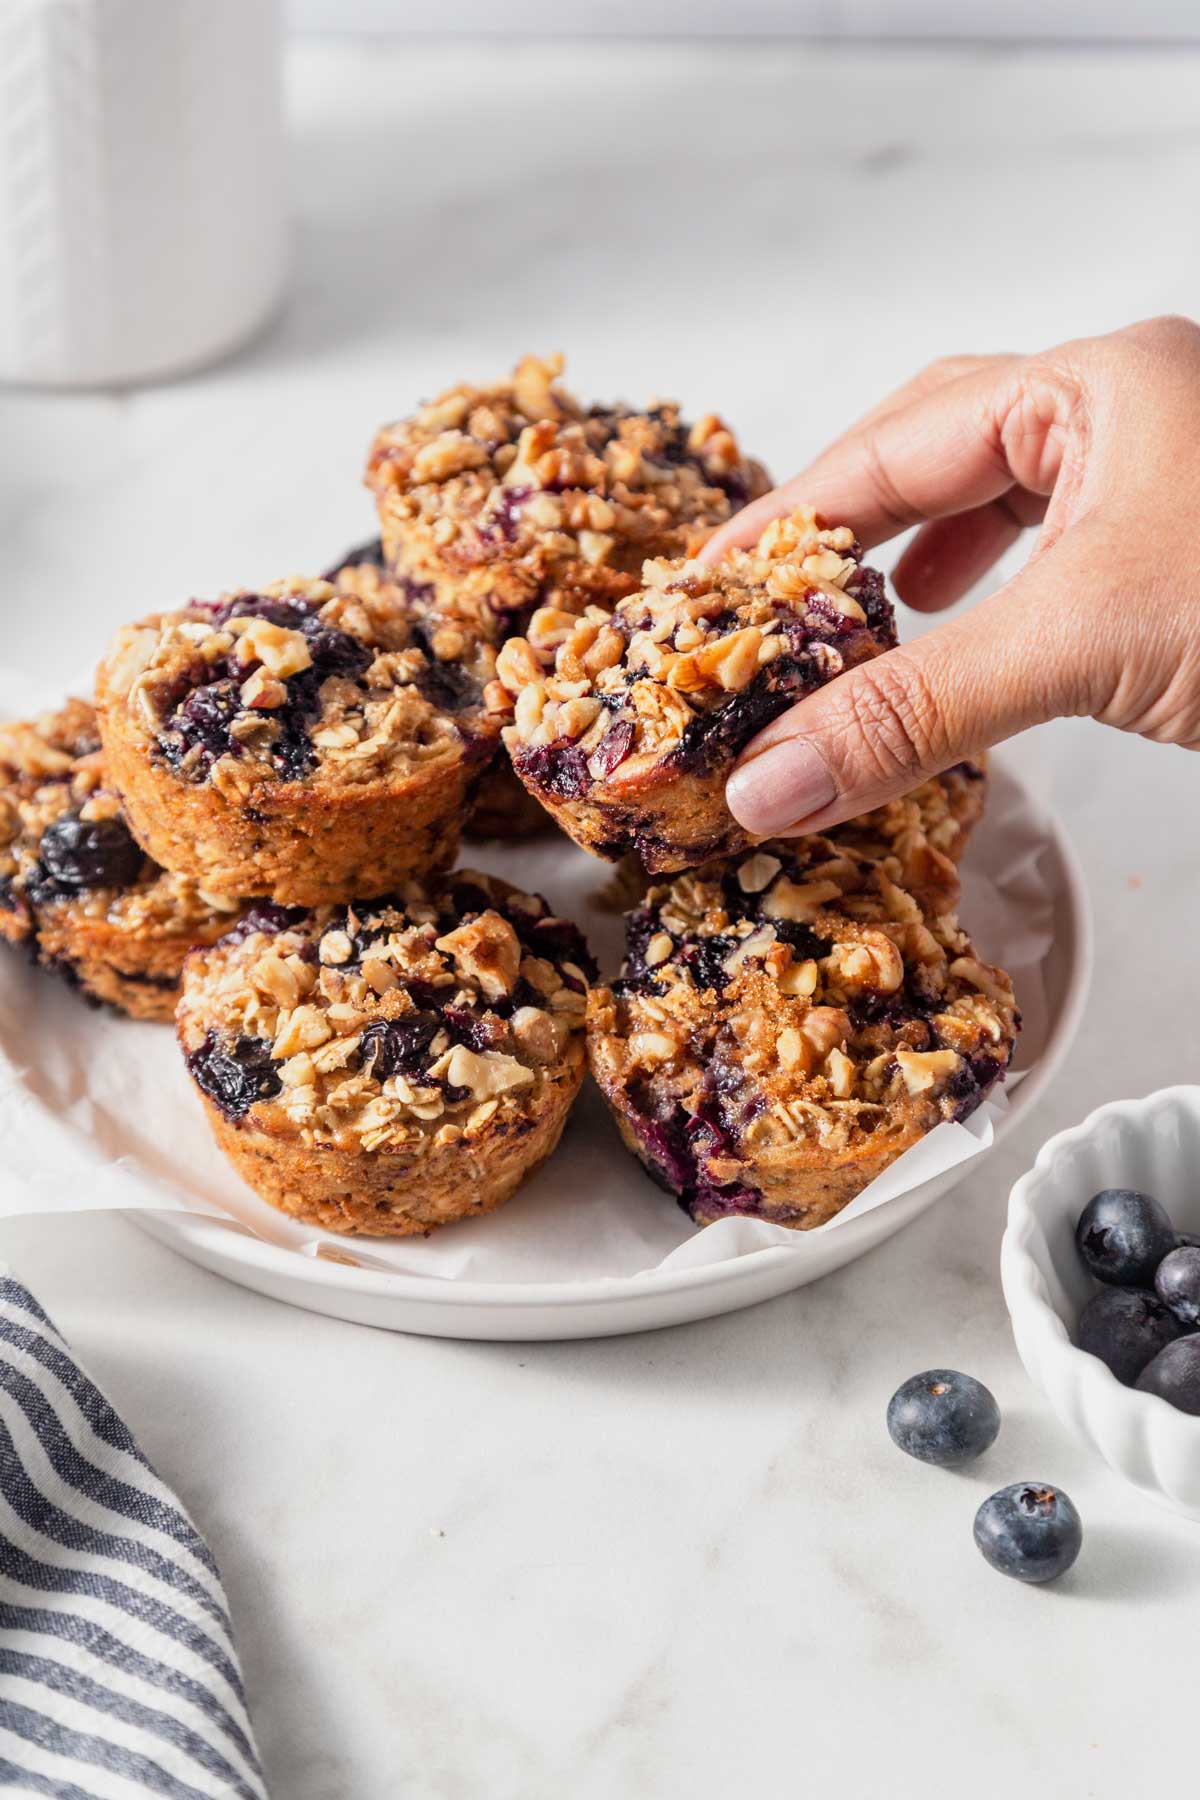 baked blueberry oatmeal cups for breakfast or brunch.